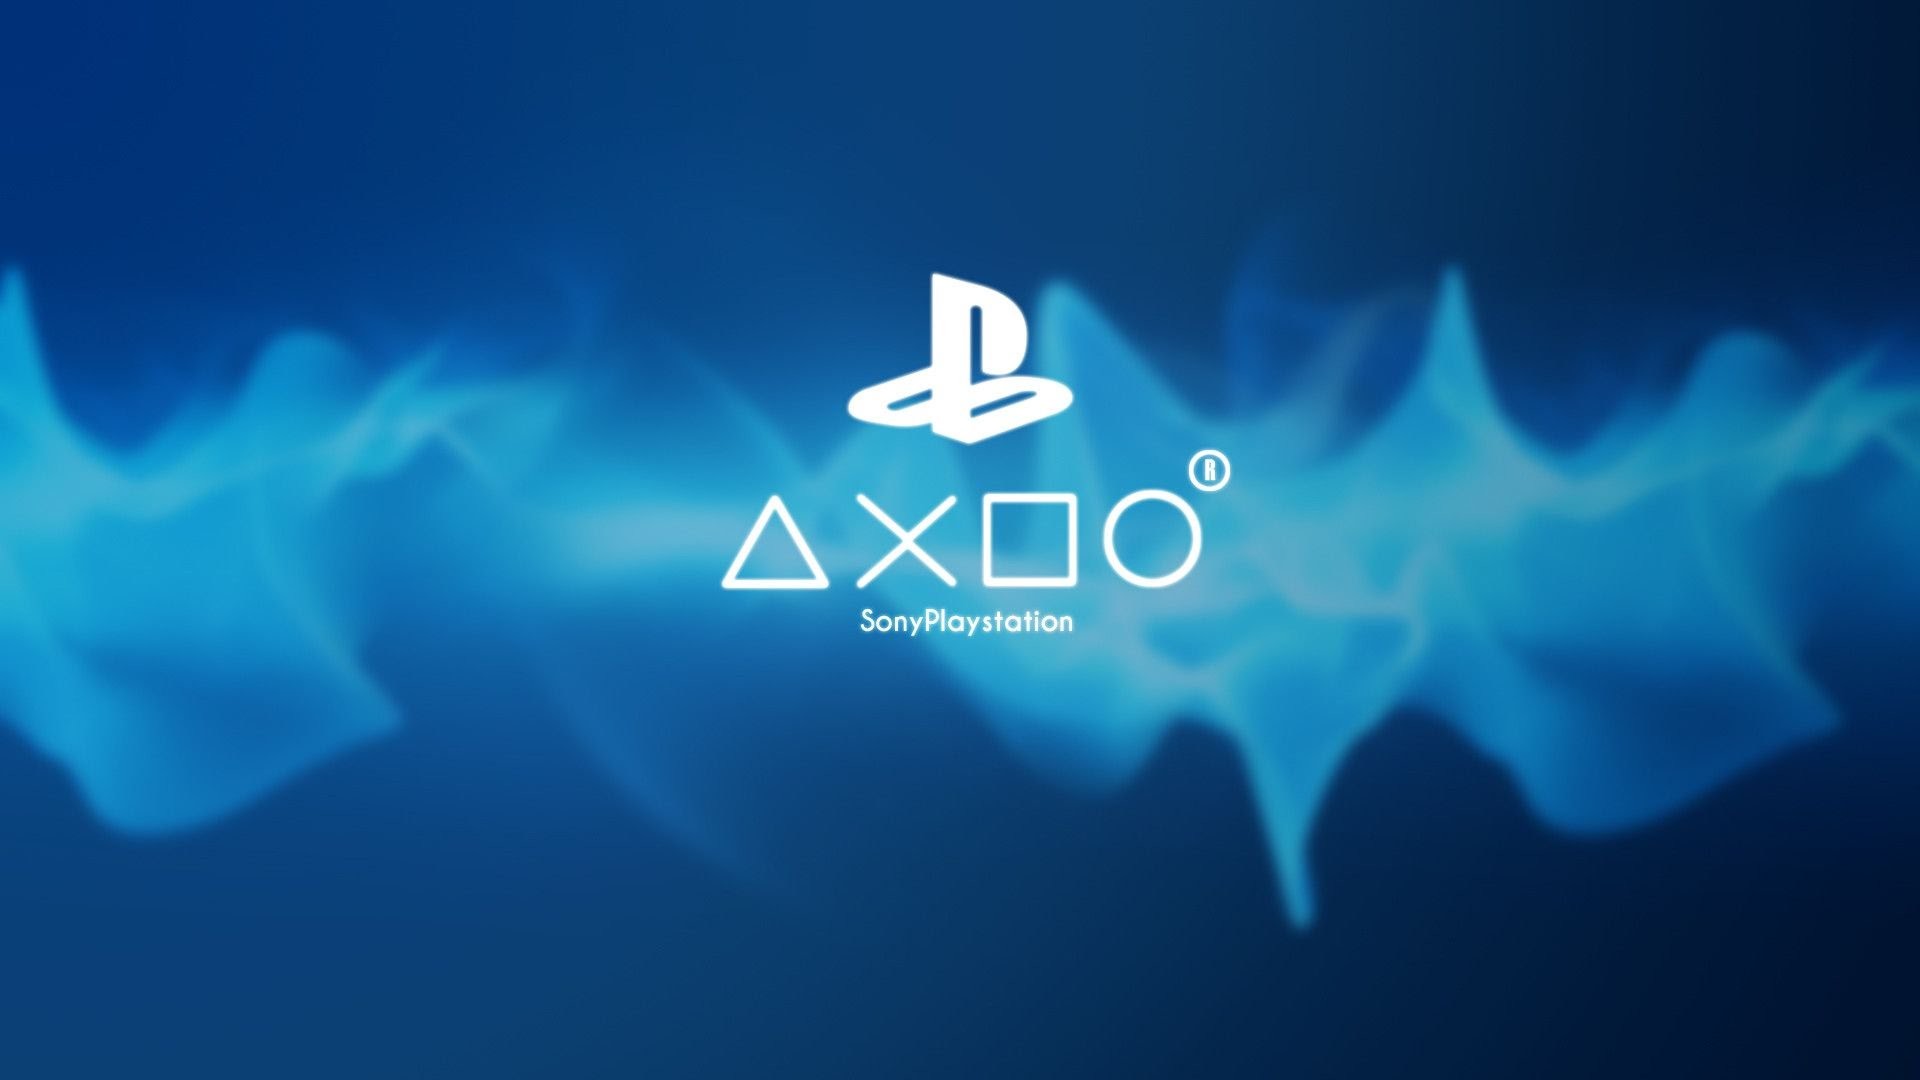 1920x1080 Playstation Logo Wallpapers HD Backgrounds